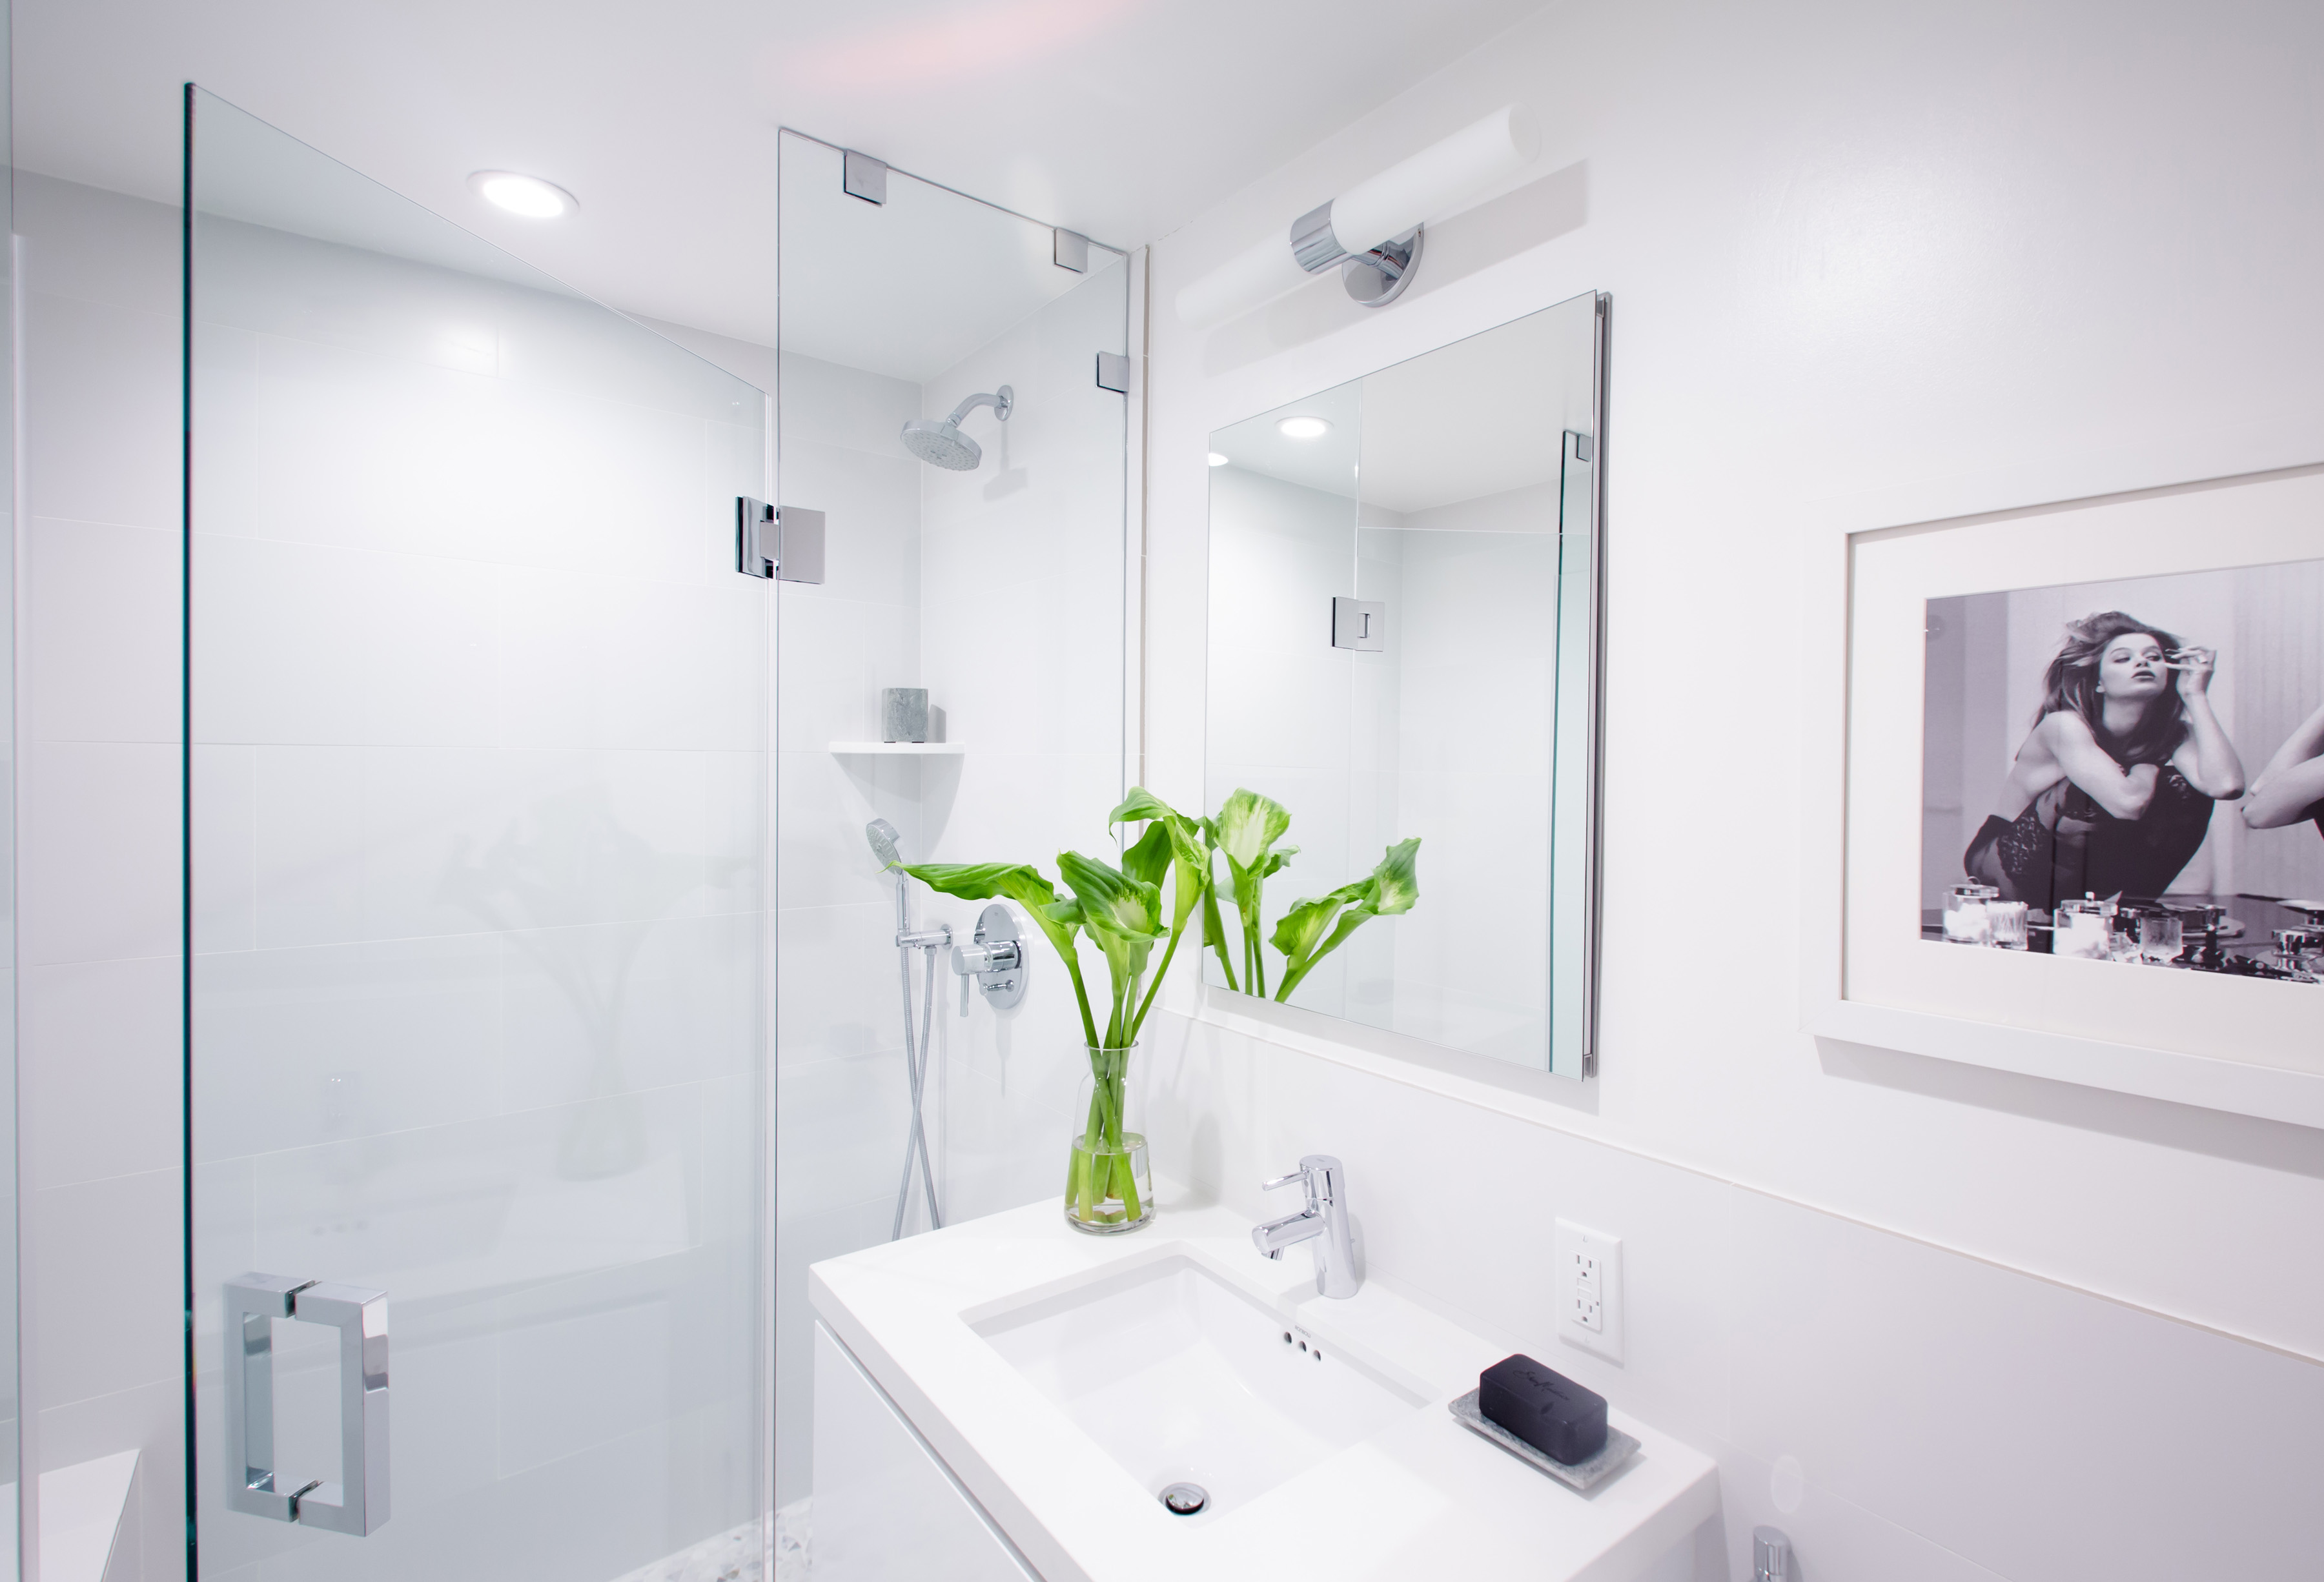 Must Haves And Essentials For Your Bathroom